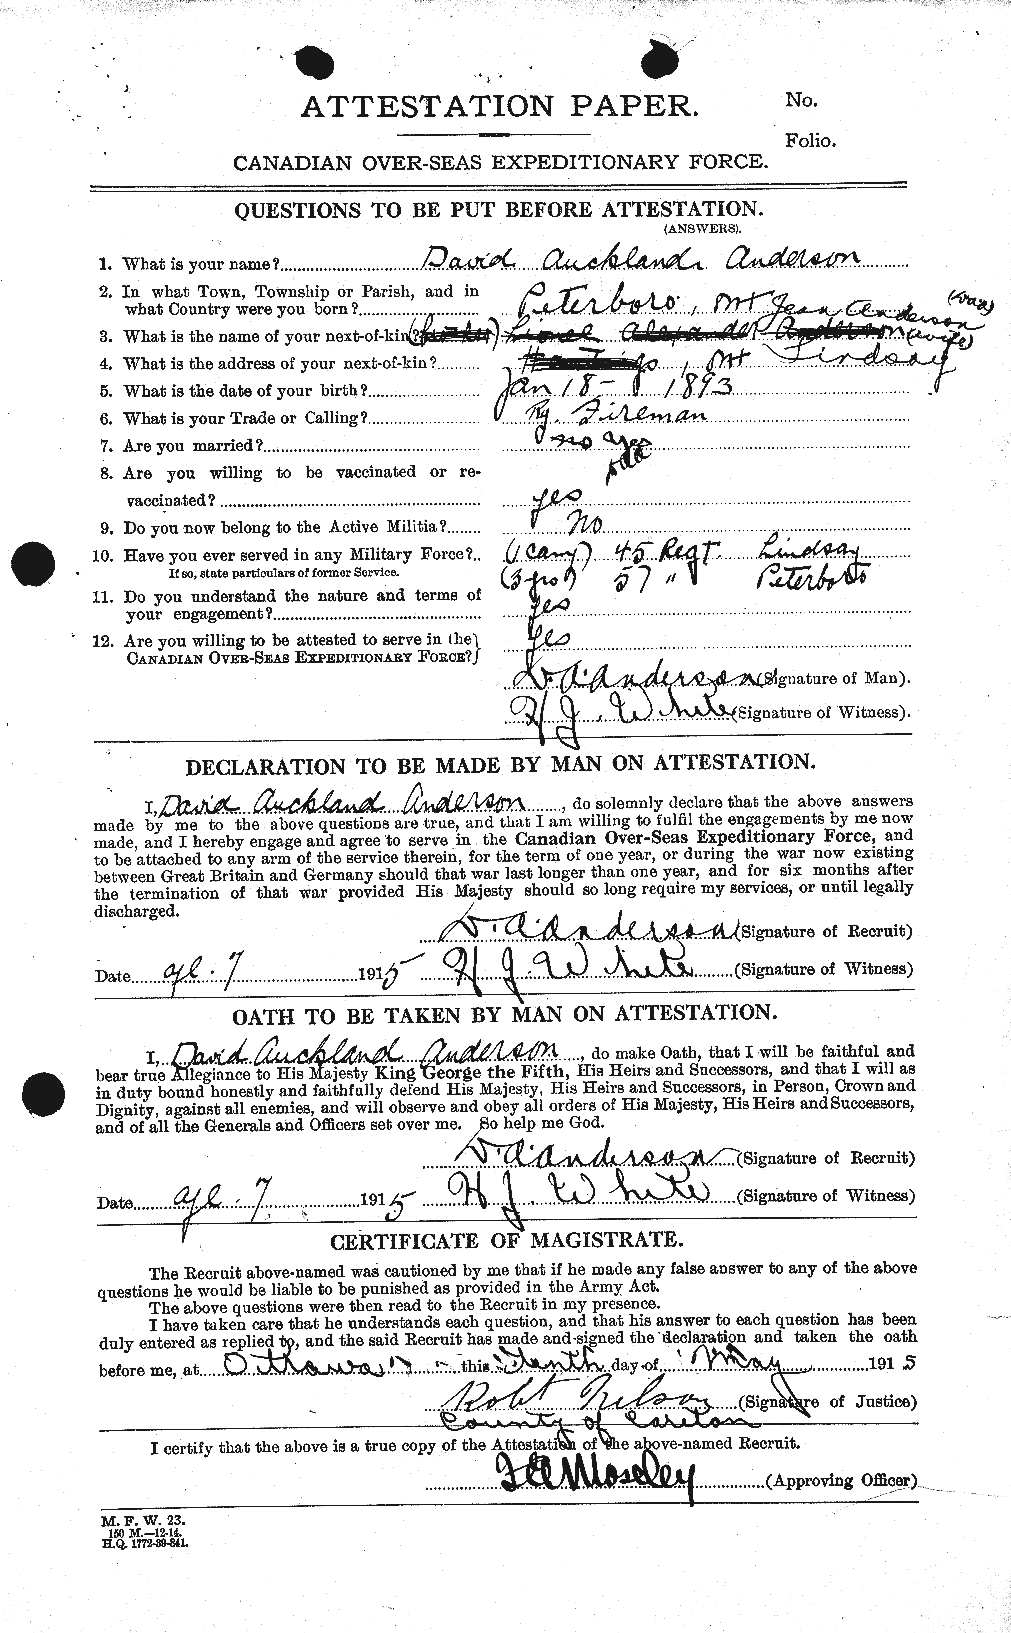 Personnel Records of the First World War - CEF 210016a